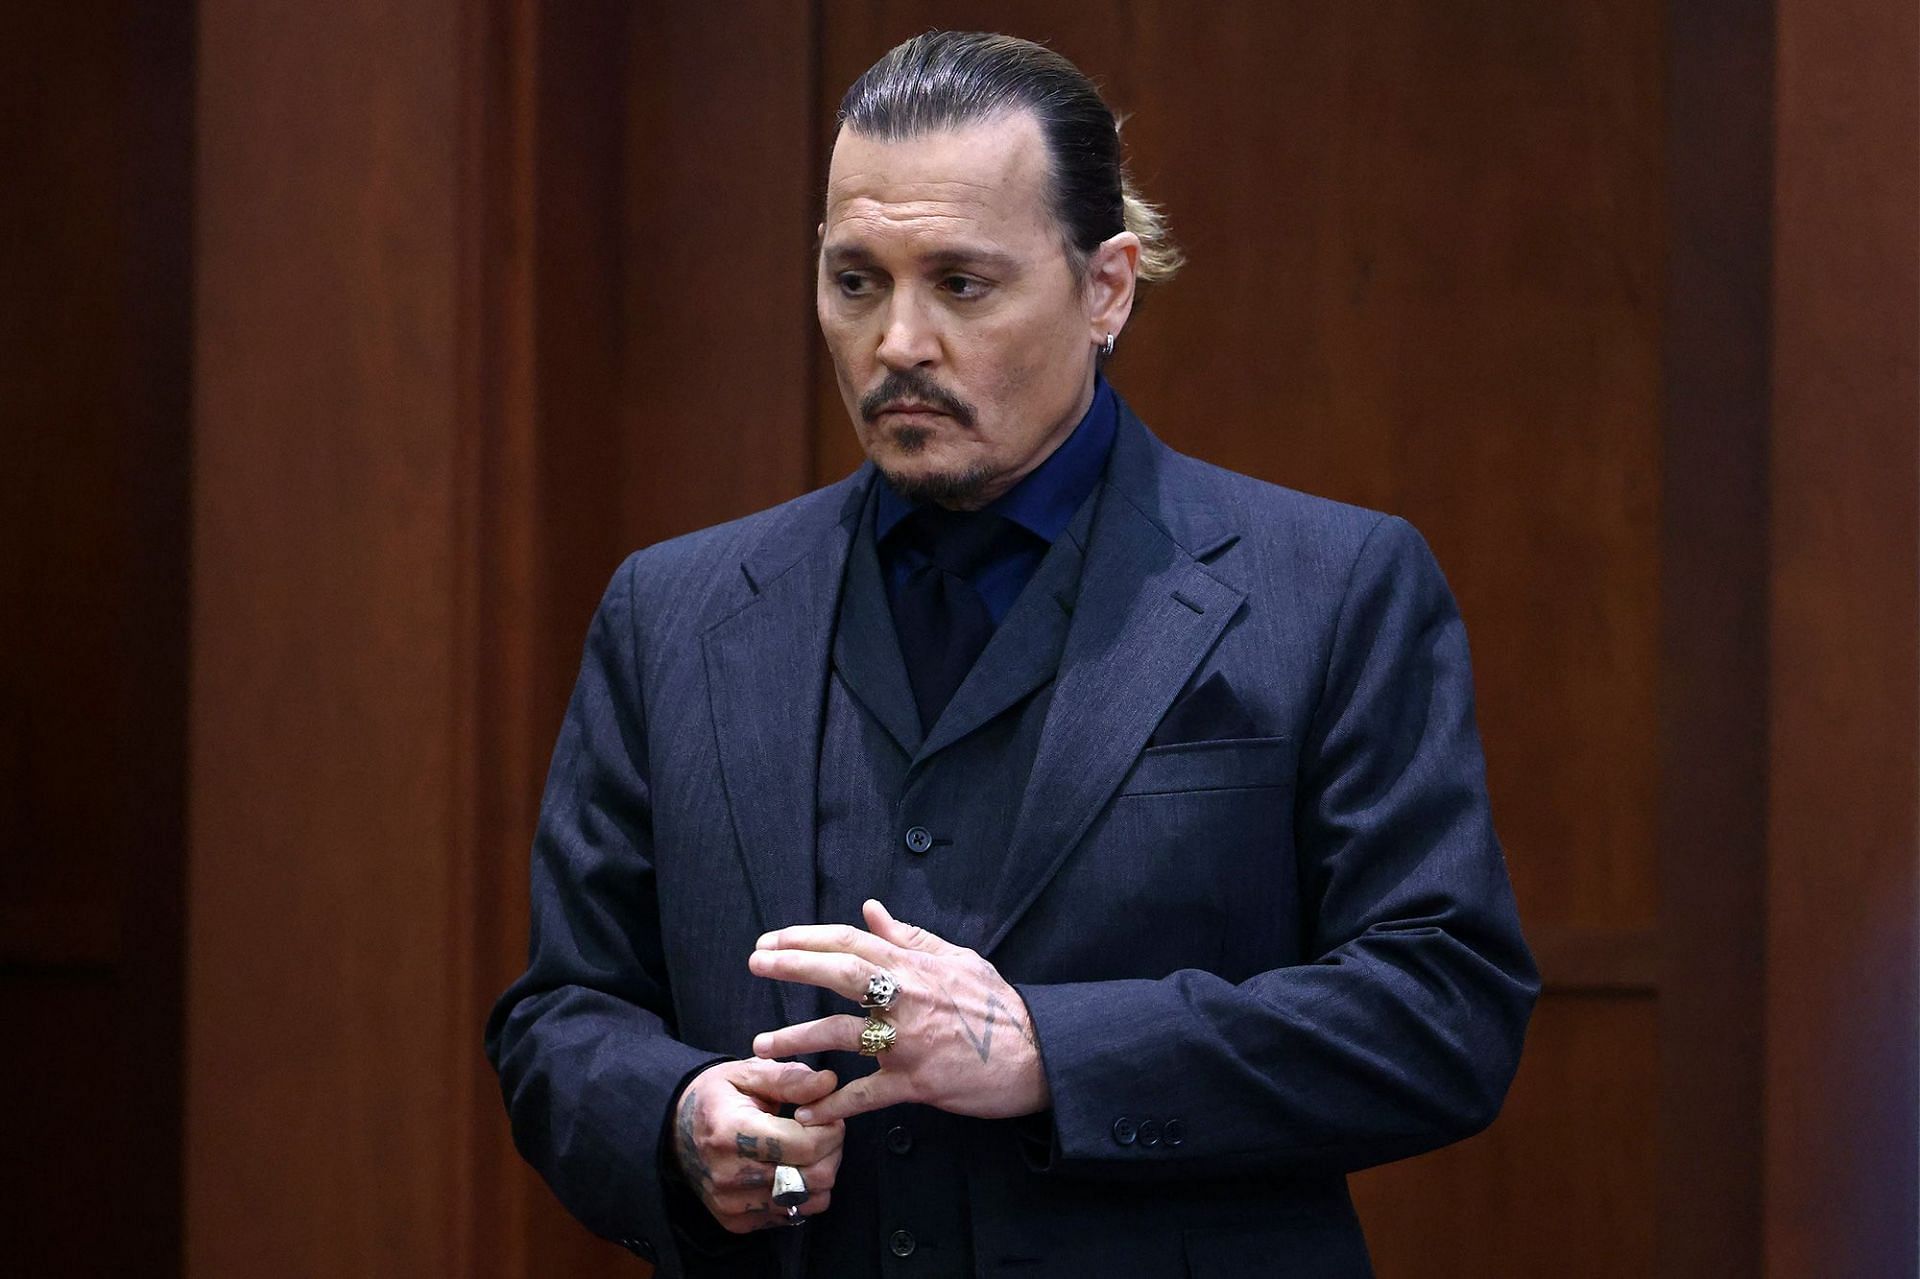 Johnny Depp dozes off in court (Image via Getty Images)